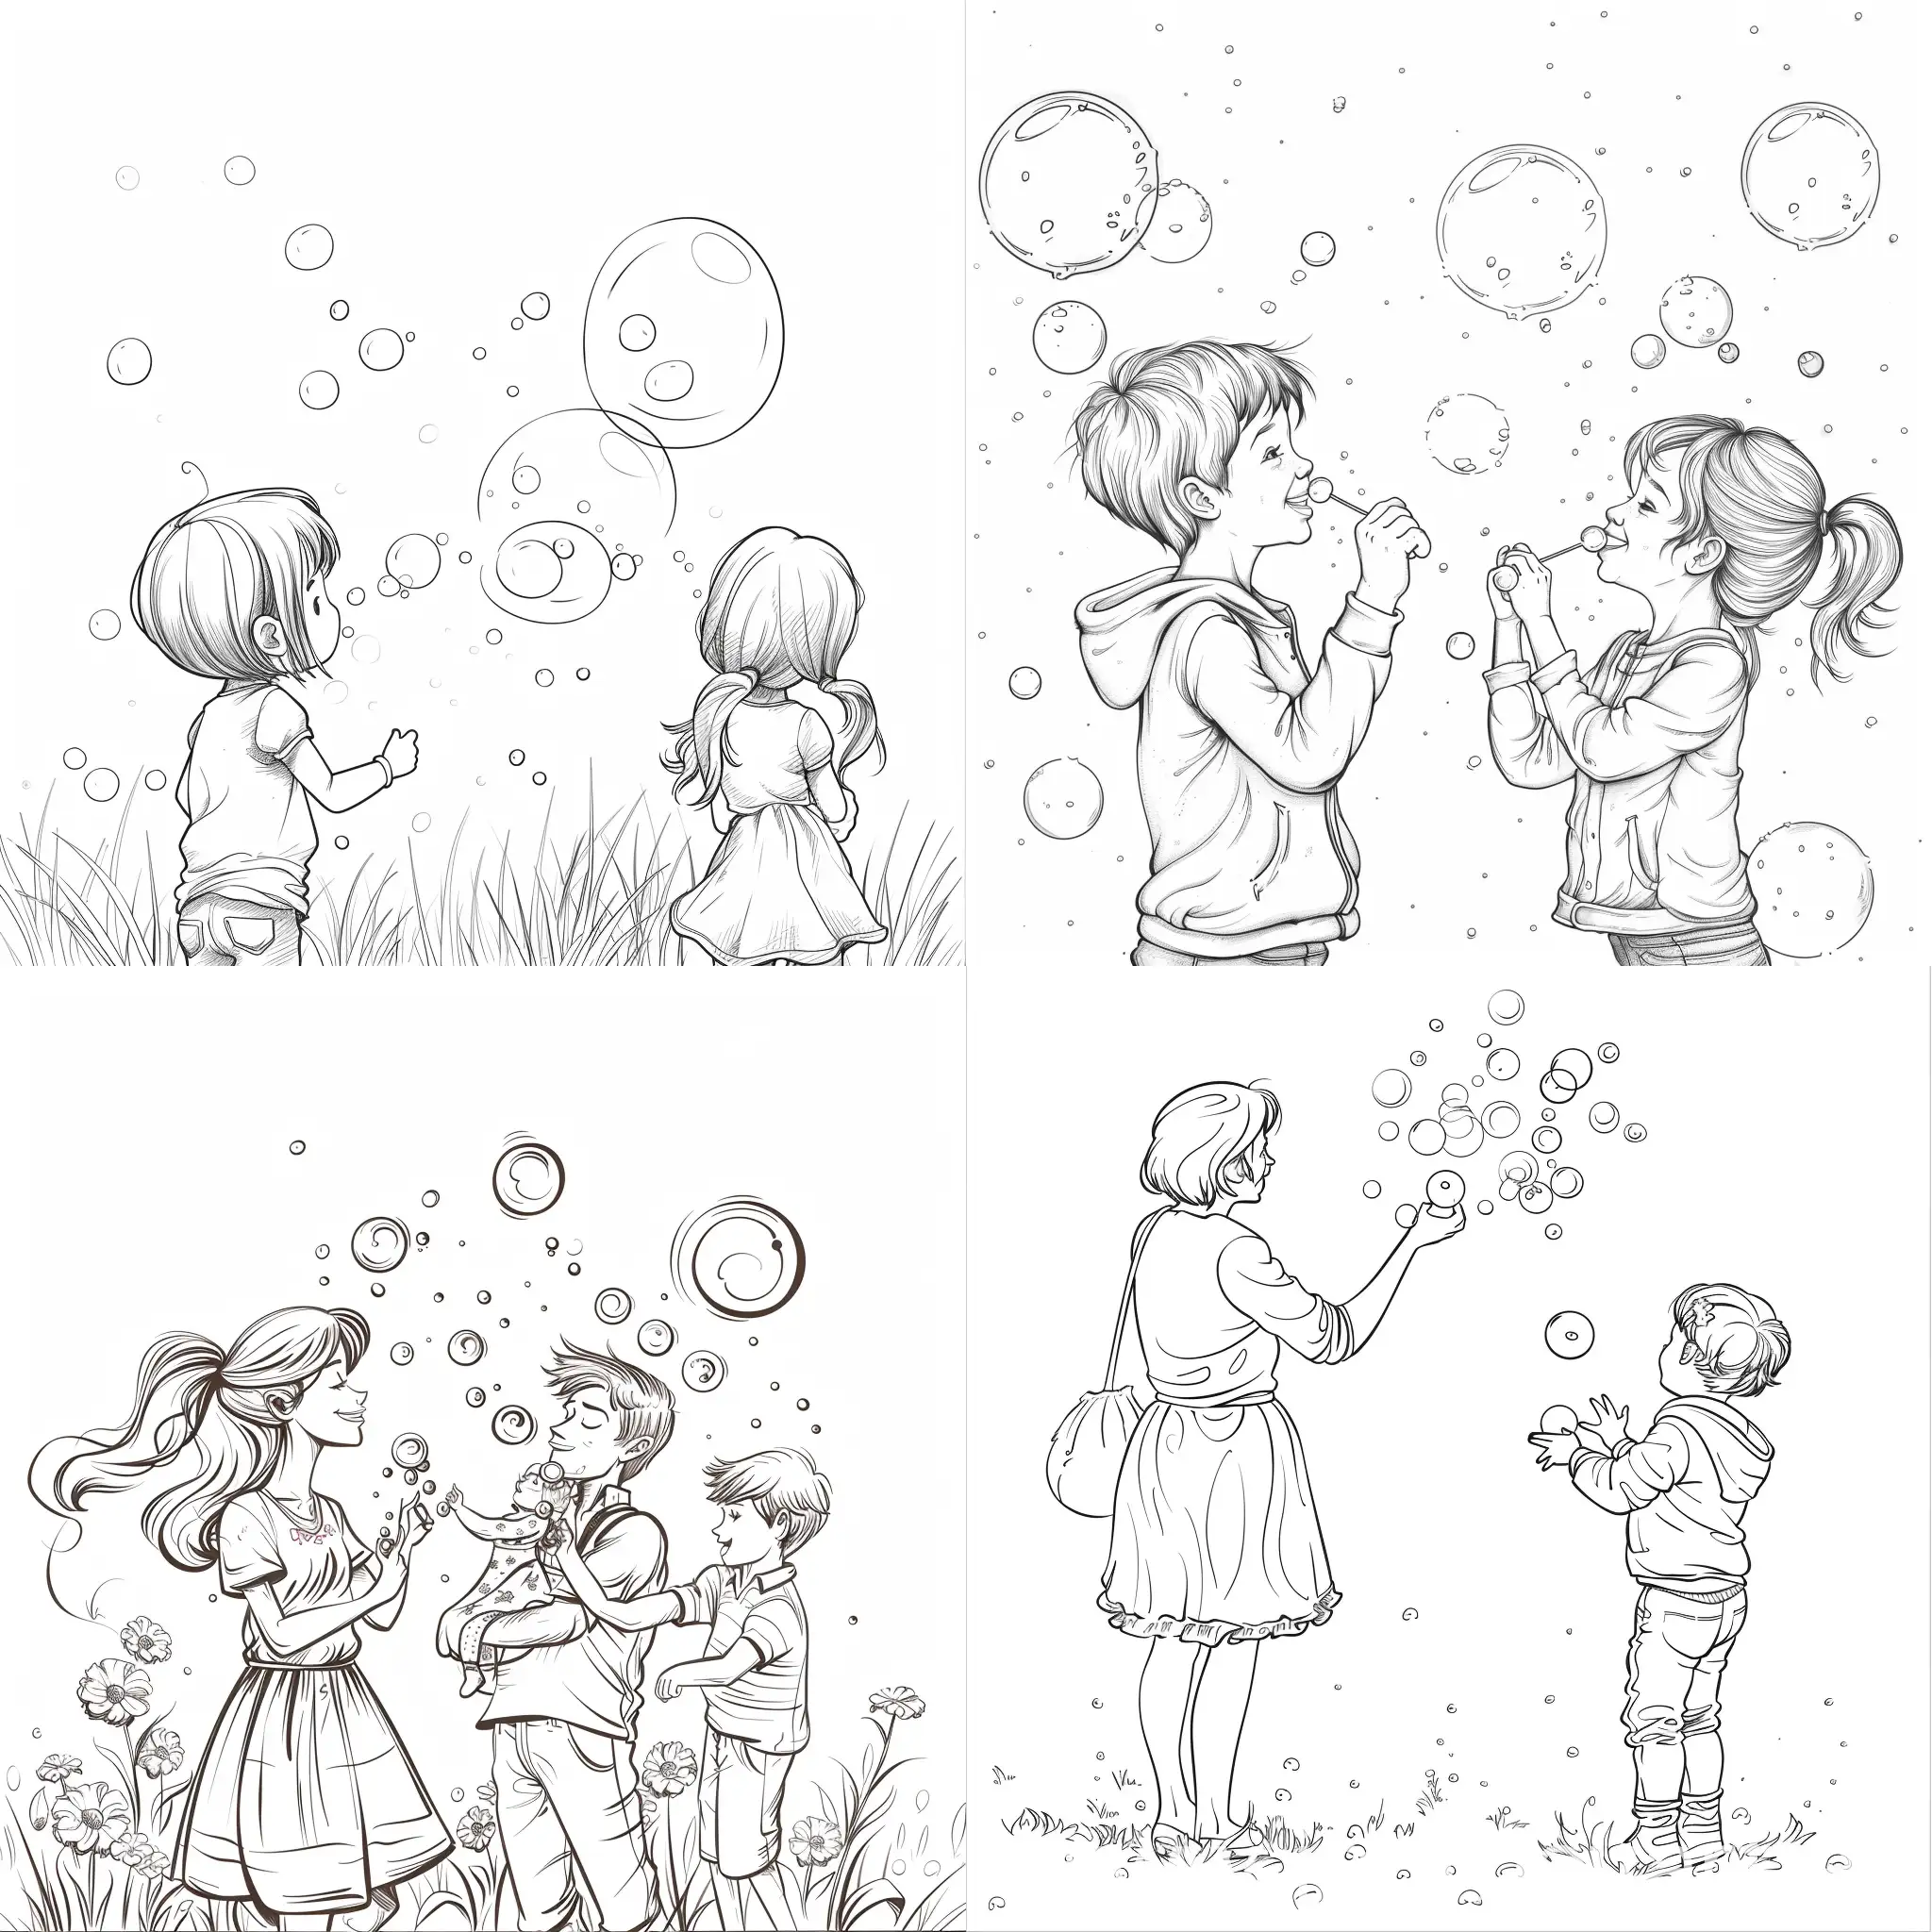 Family-Love-Children-Blowing-Bubbles-in-Sketch-Style-Coloring-Page